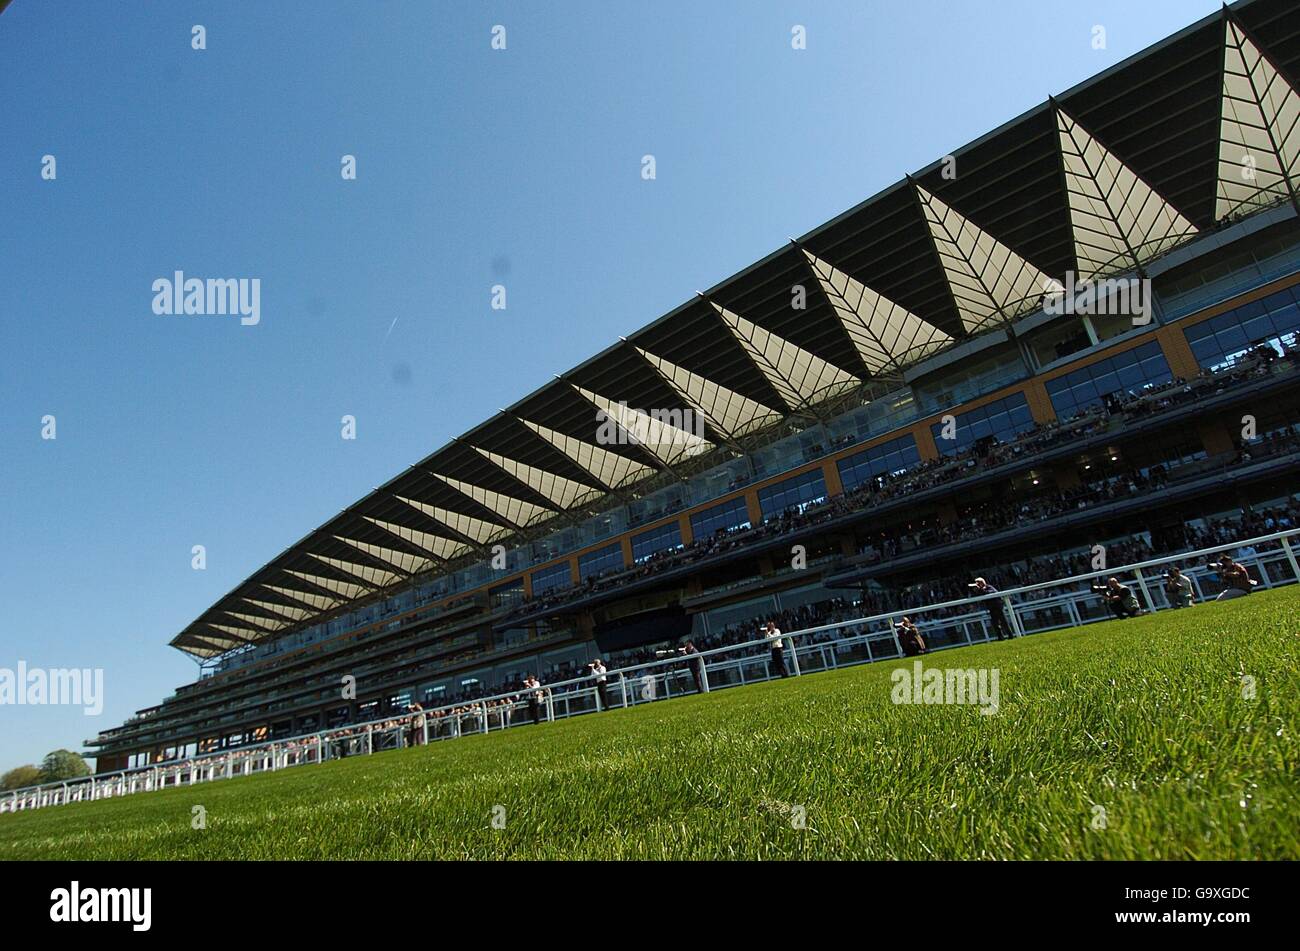 Horse Racing - Day of the Third Age Meeting - Ascot Racecourse Stock Photo